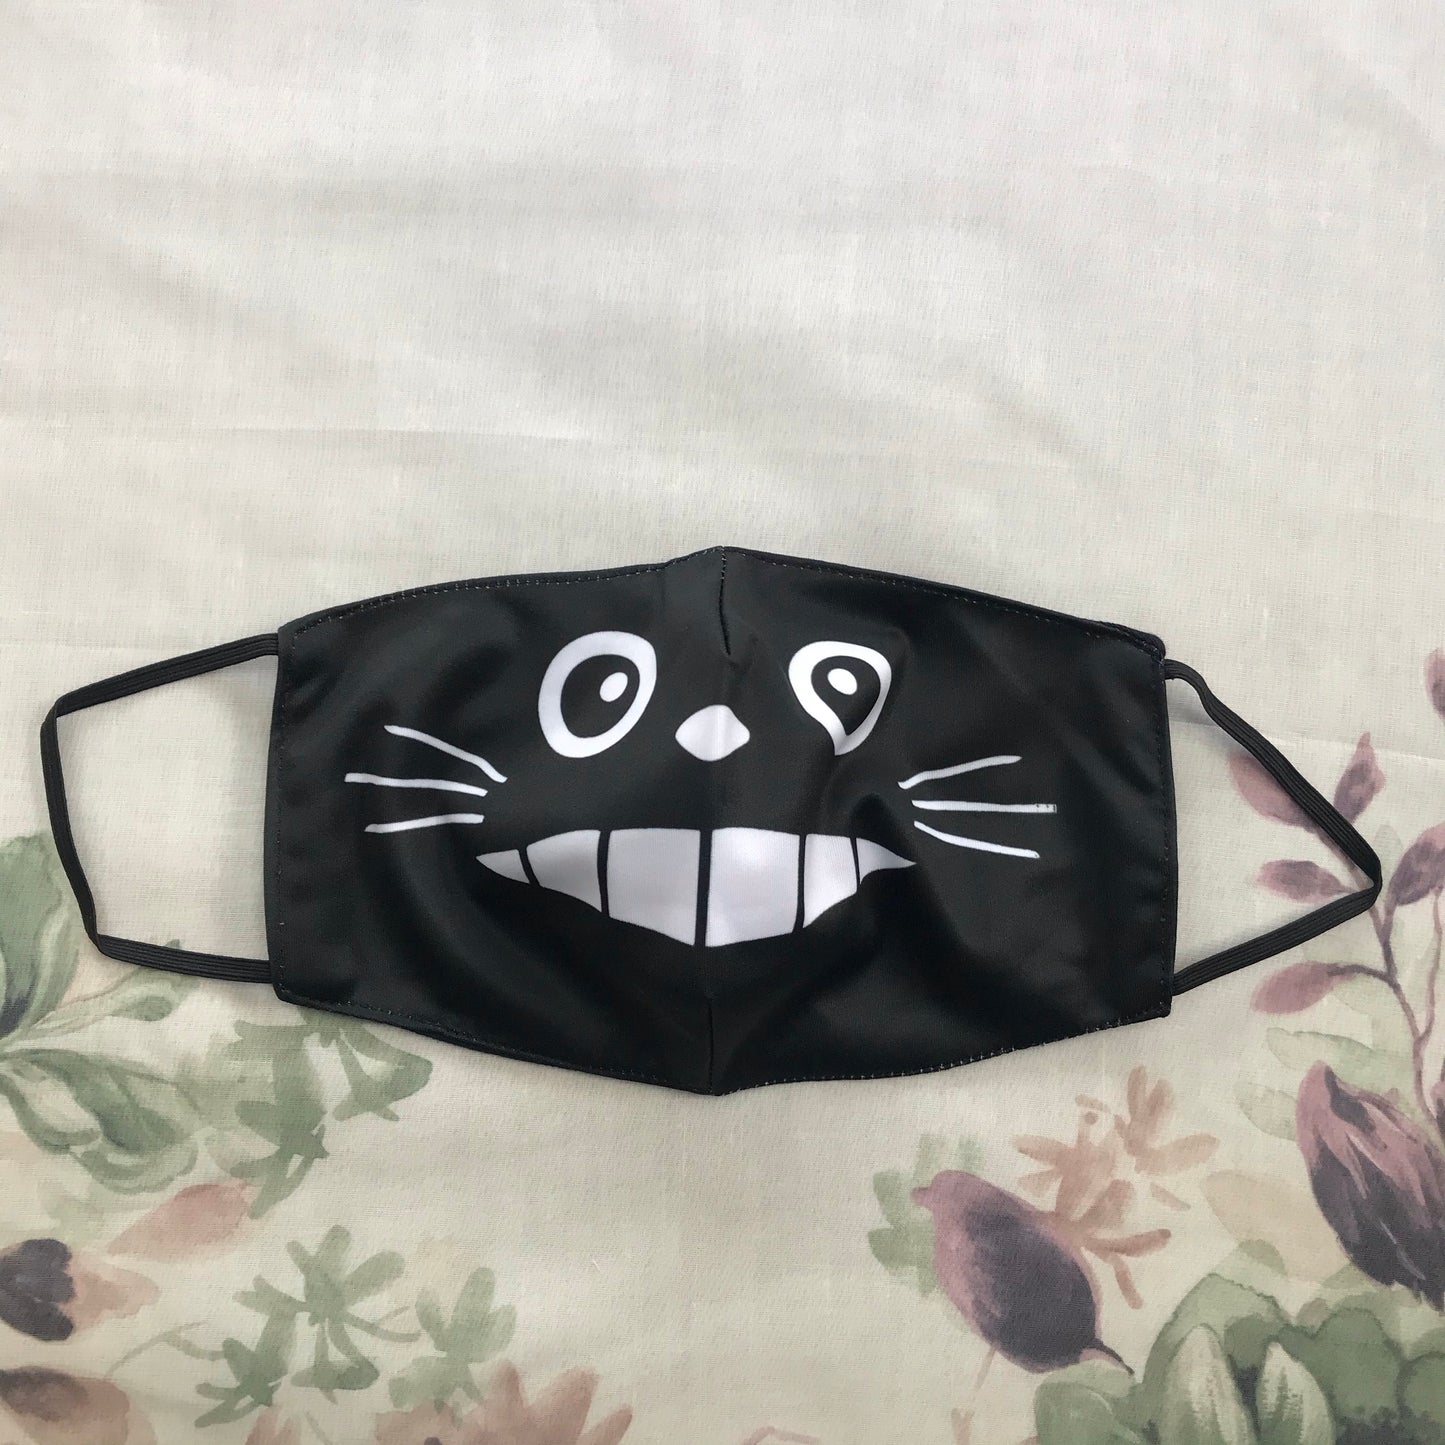 Totoro face mask